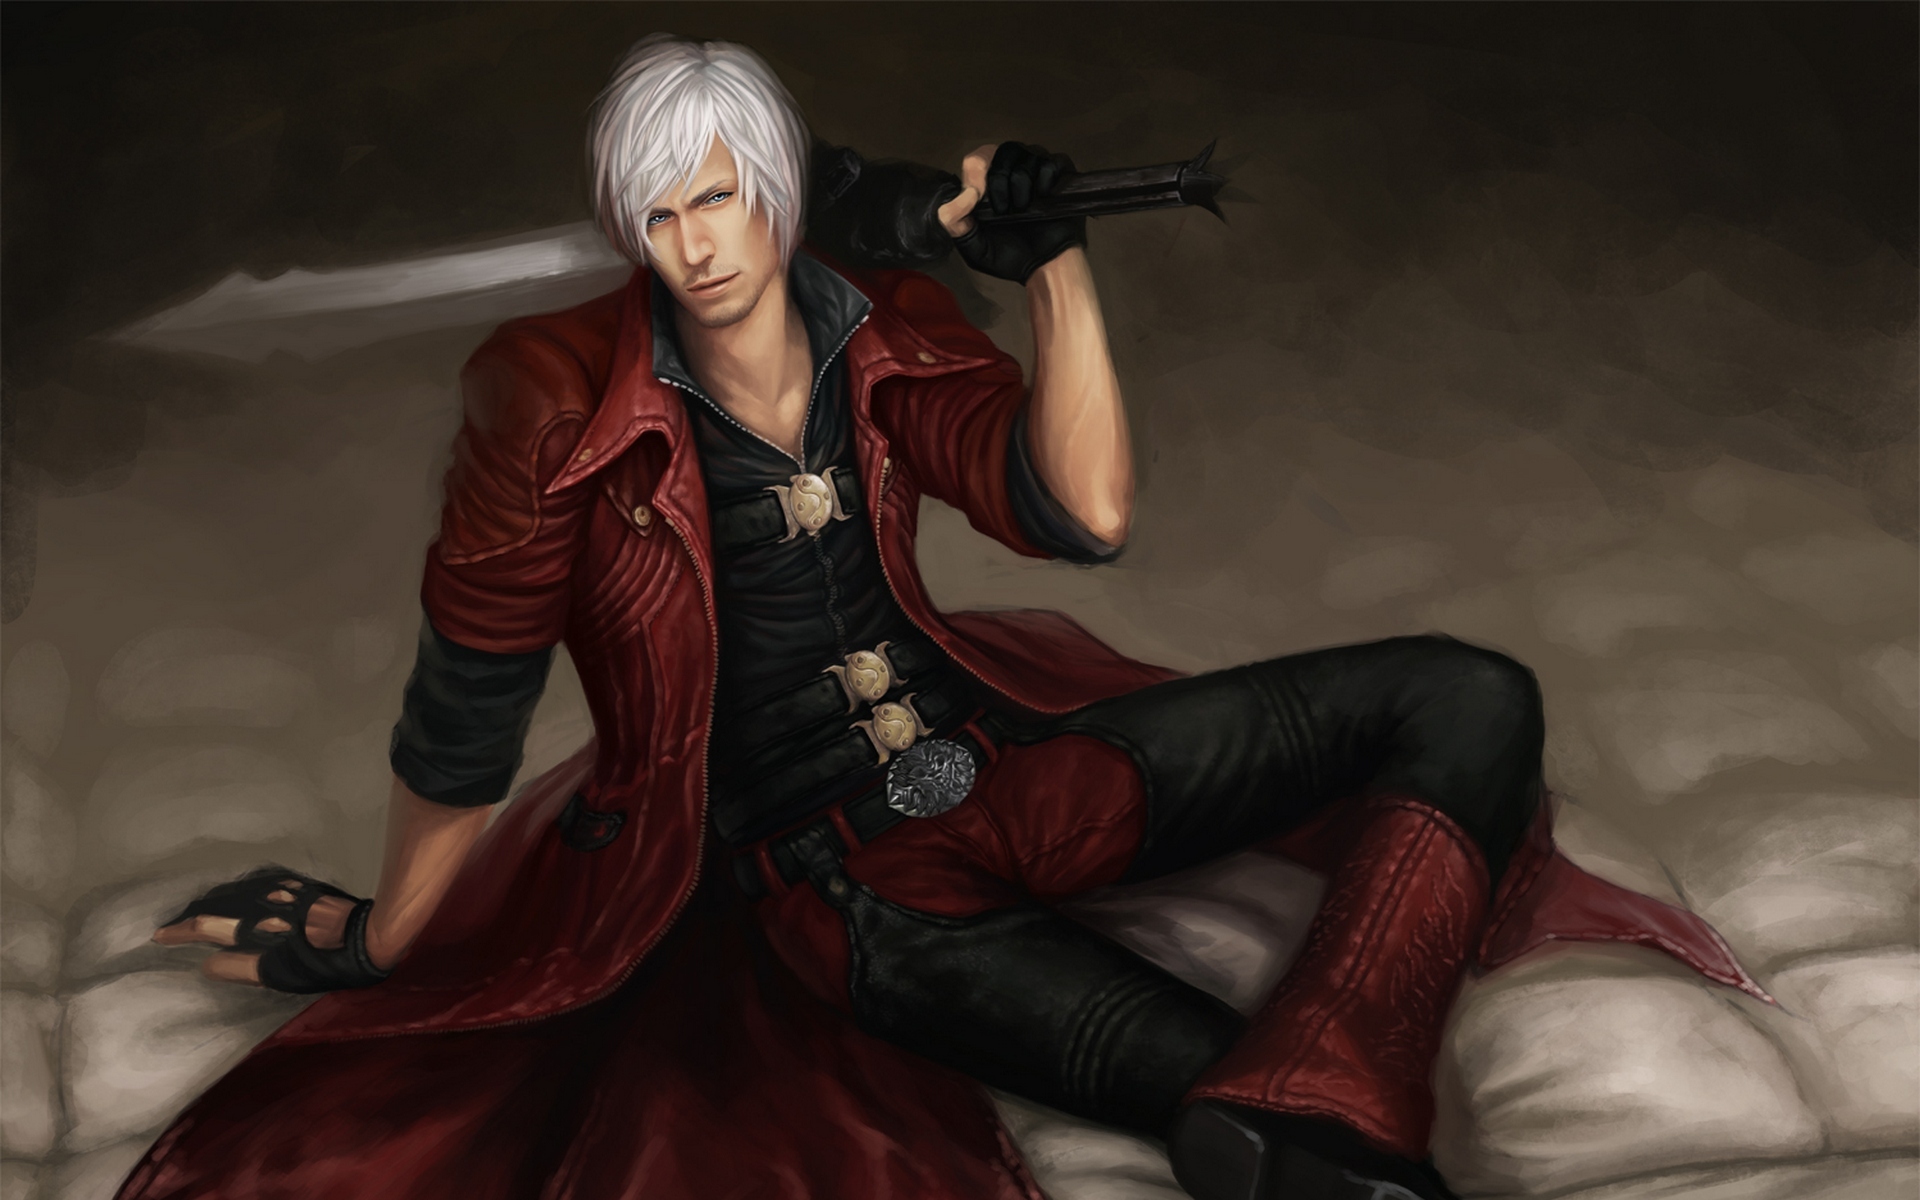 devil-may-cry-4-dmc-4-character-wallpaper-hd-games-4k-wallpapers-images-and-background